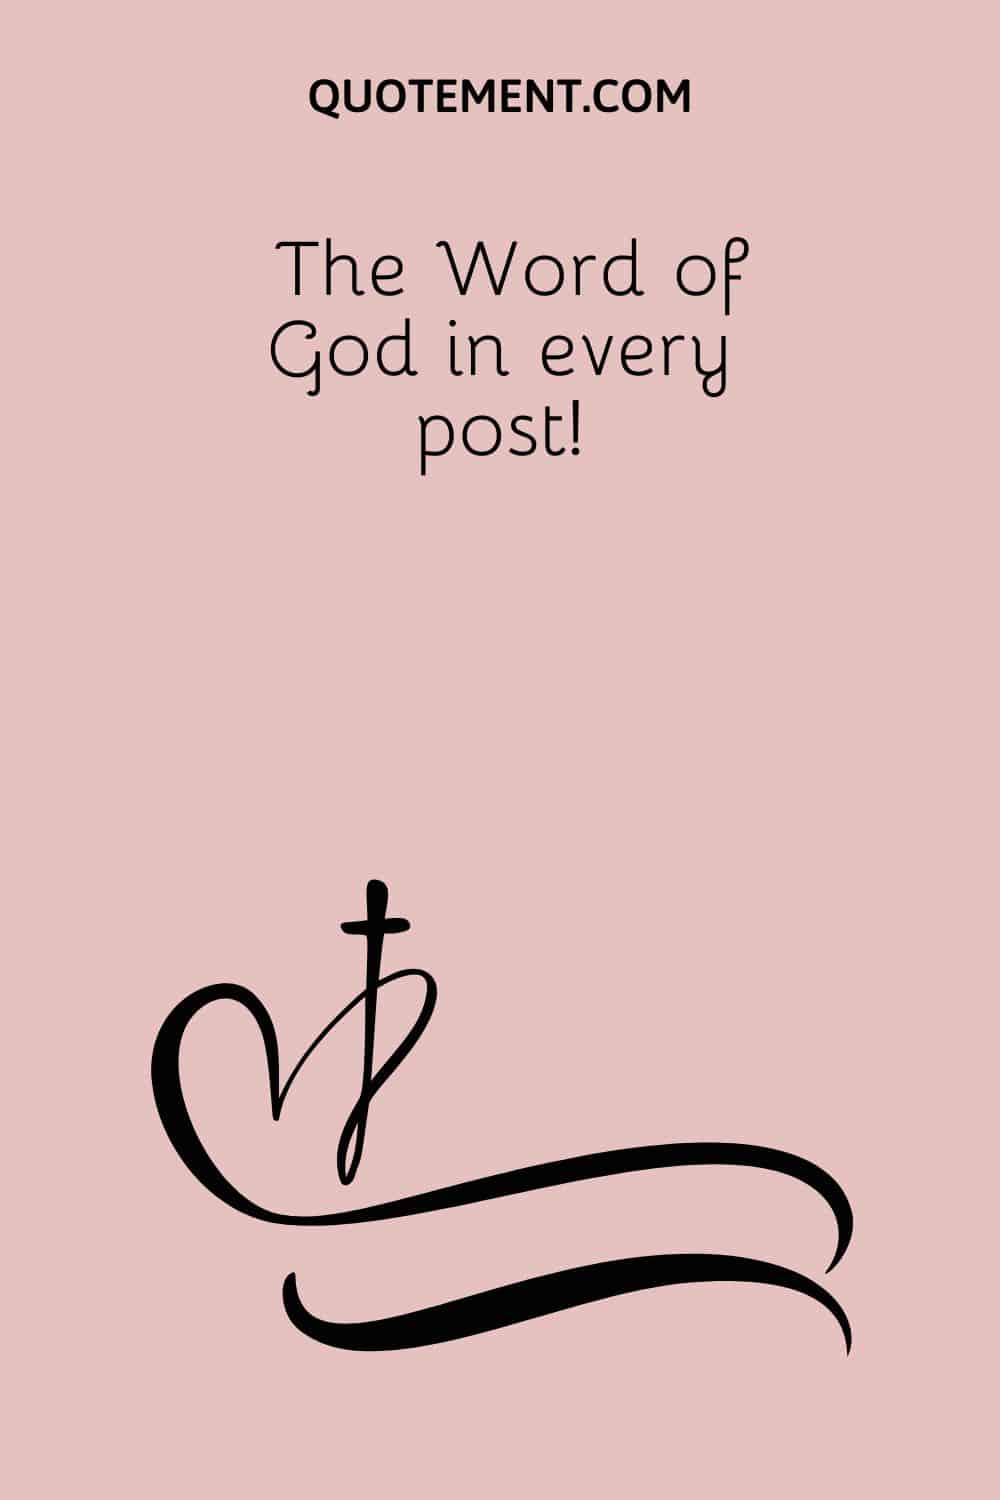 The Word of God in every post